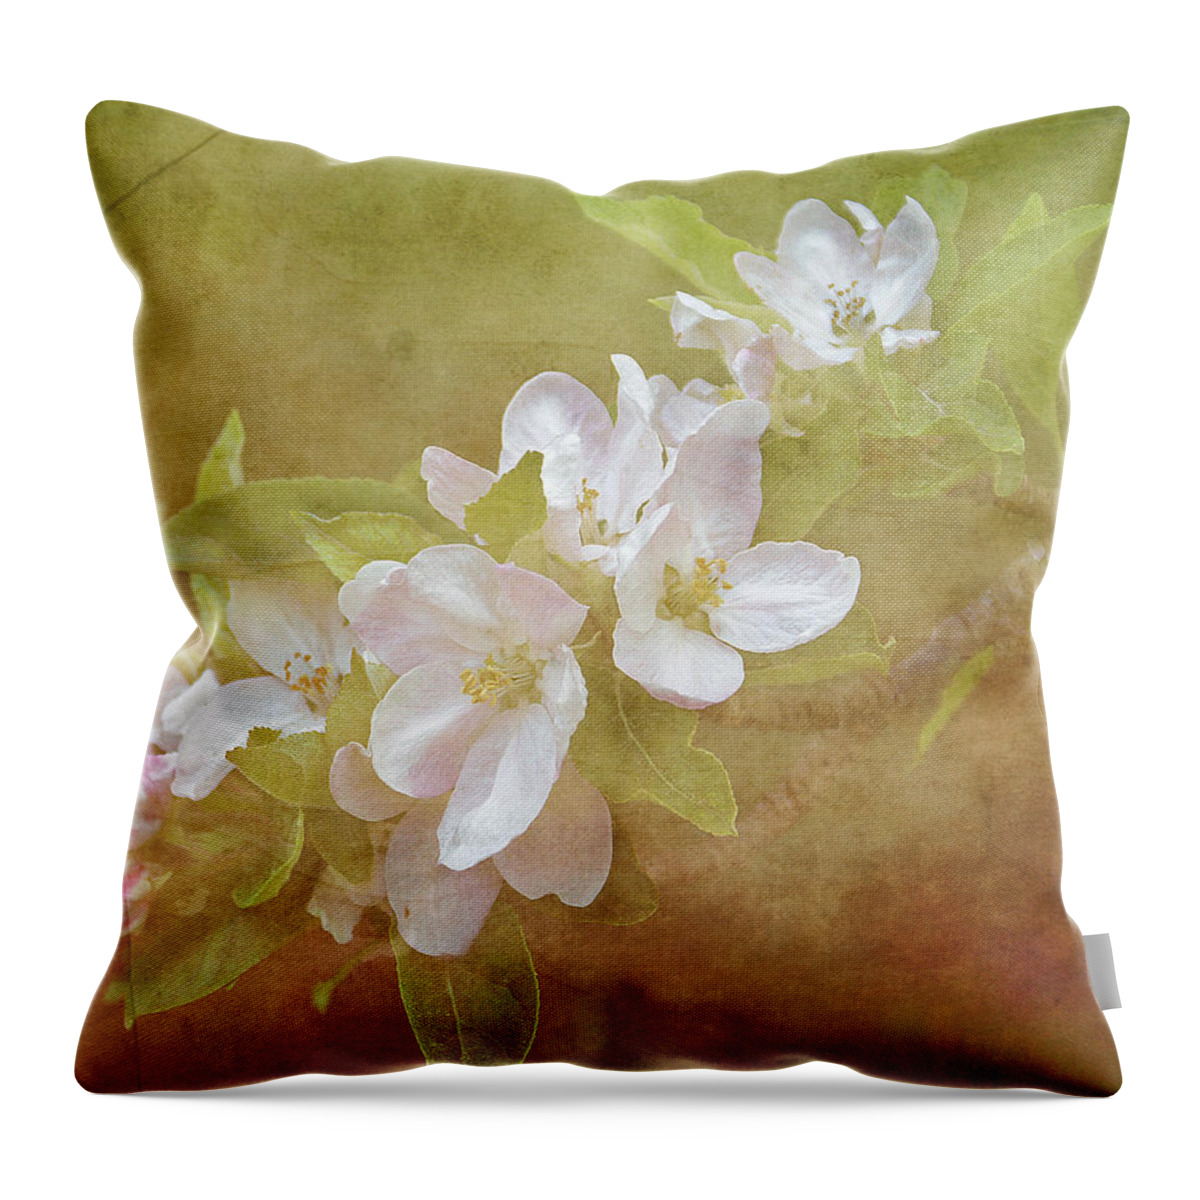 Apple Blossom Throw Pillow featuring the painting Apple Blossom Spring by TnBackroadsPhotos 